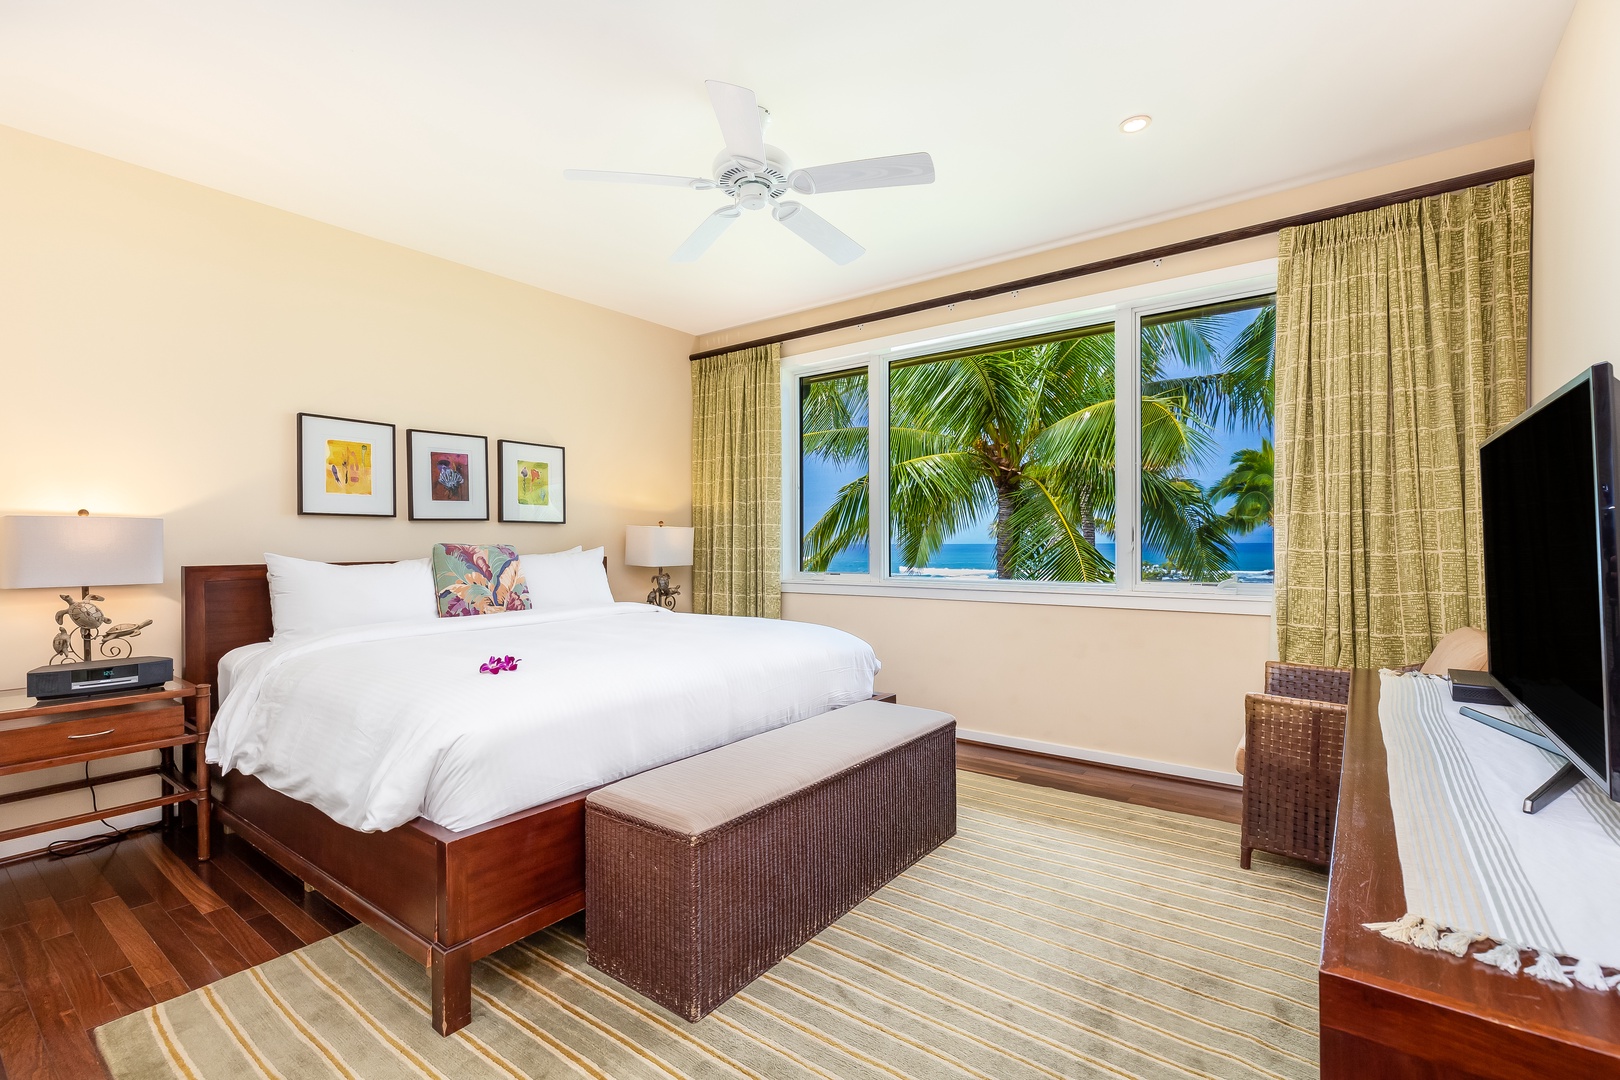 Kahuku Vacation Rentals, OFB Turtle Bay Villas 301 - Primary suite, which offers a King-size bed, walk-in closet, and spa-like bathroom